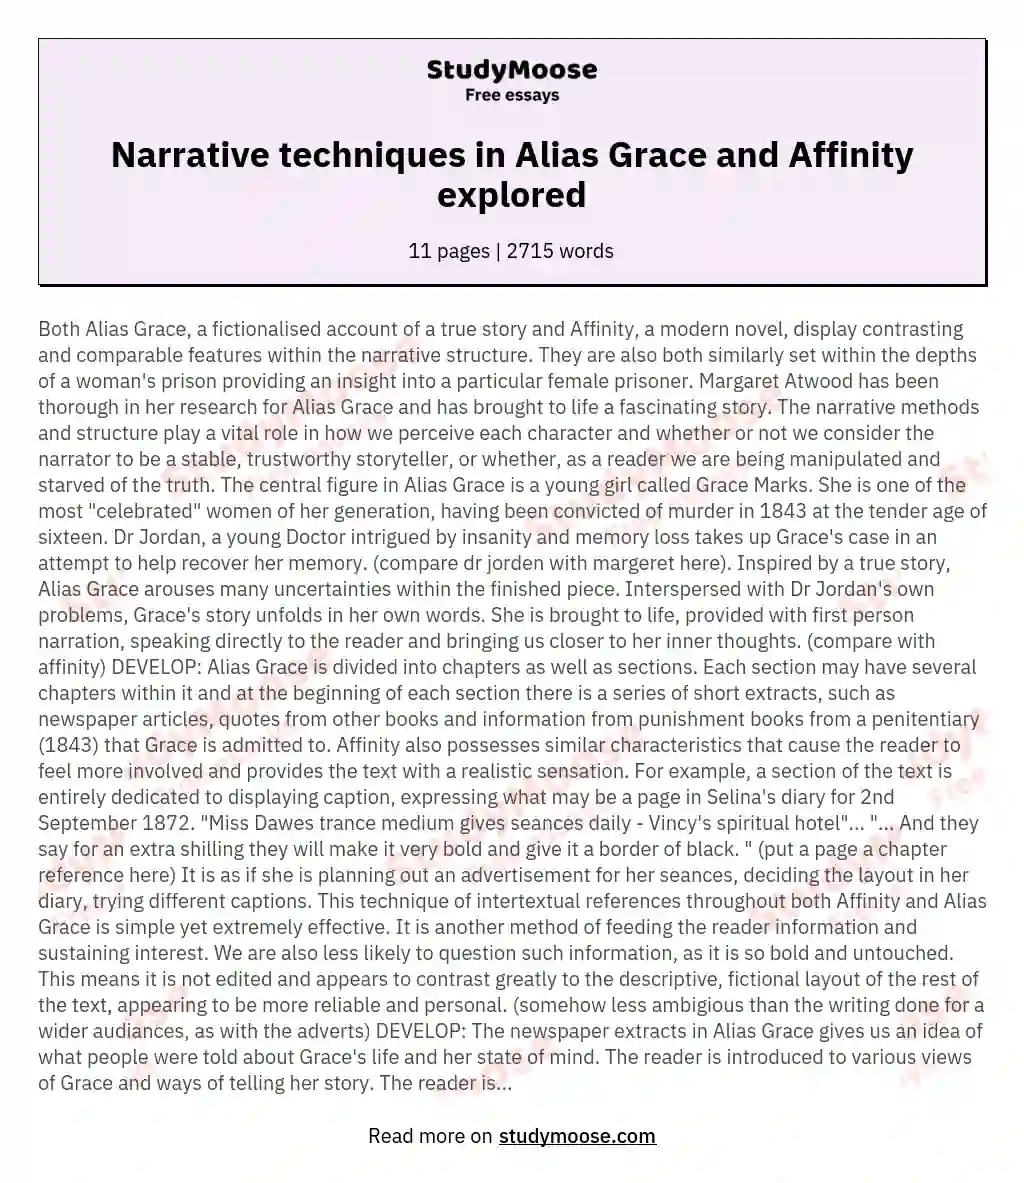 Narrative techniques in Alias Grace and Affinity explored essay